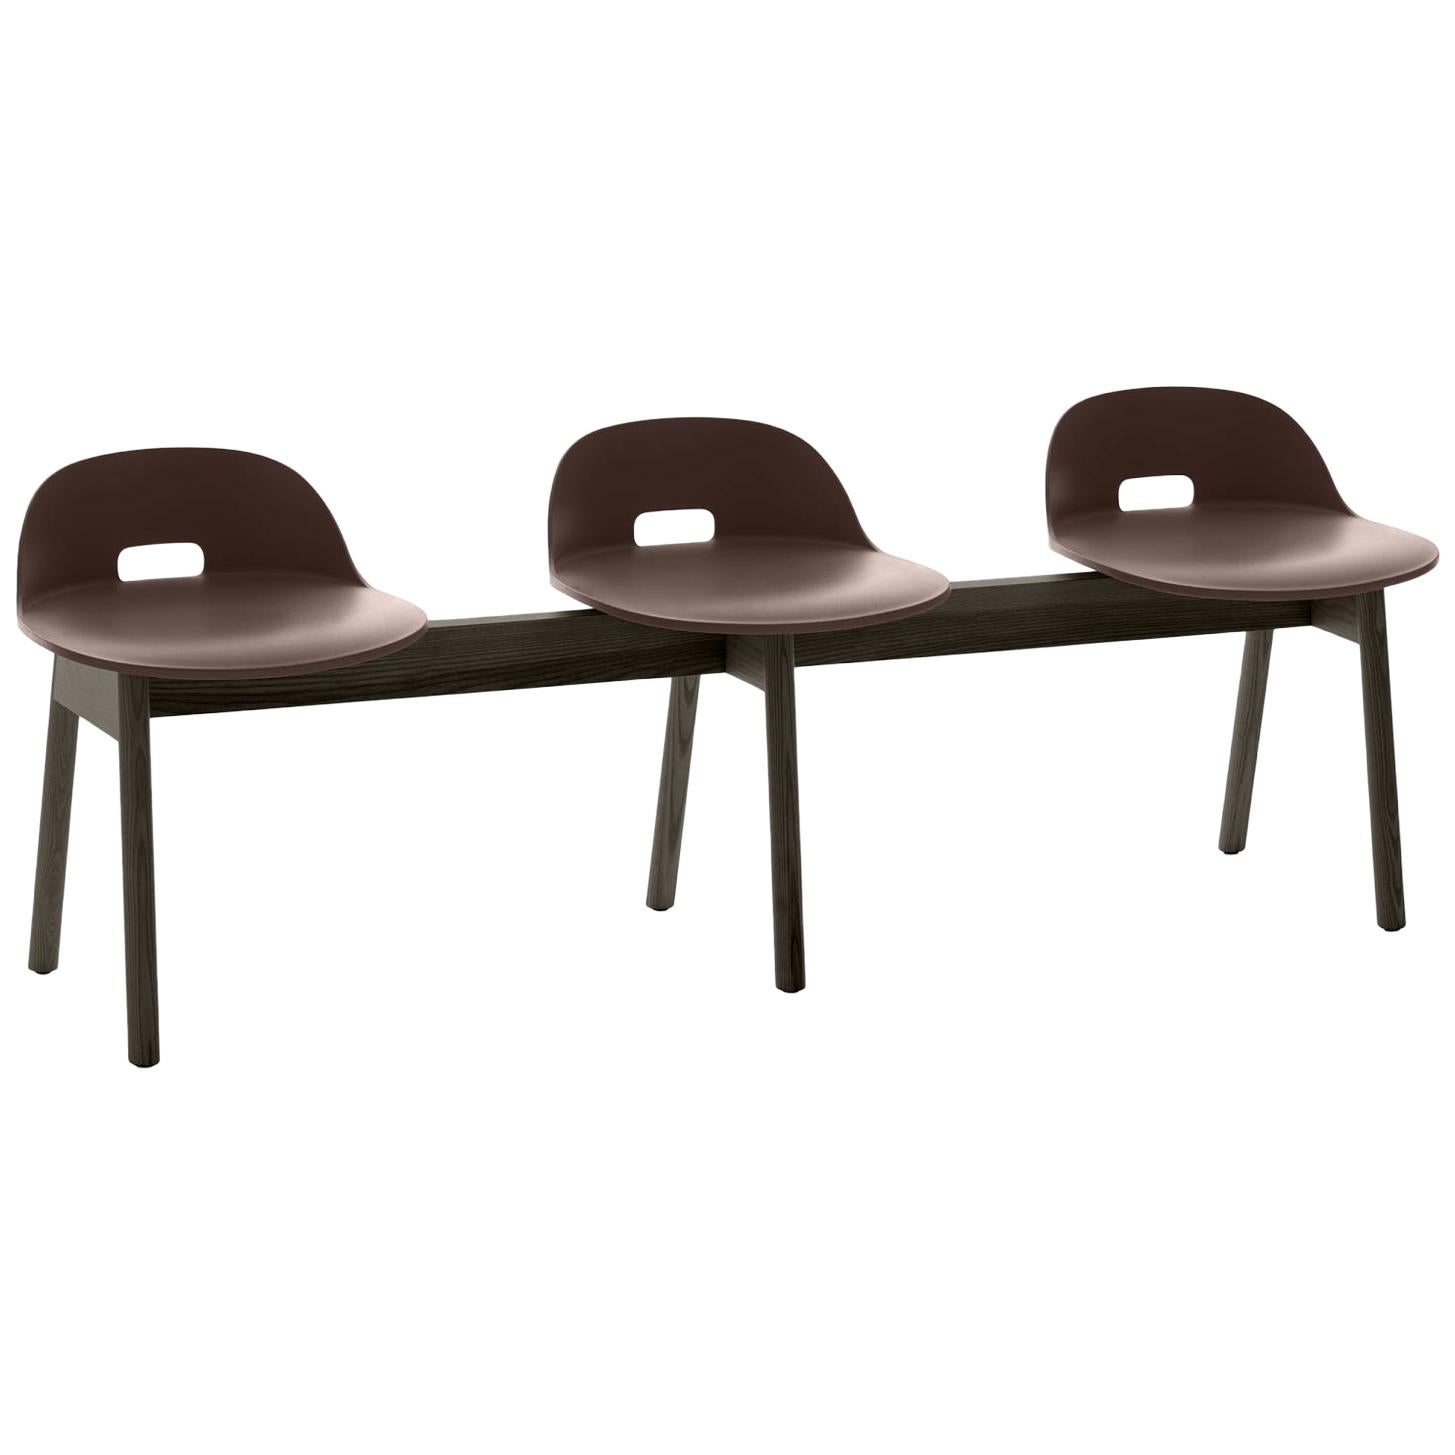 Emeco Alfi 3-Seat Bench in Brown and Dark Ash with Low Back by Jasper Morrison For Sale